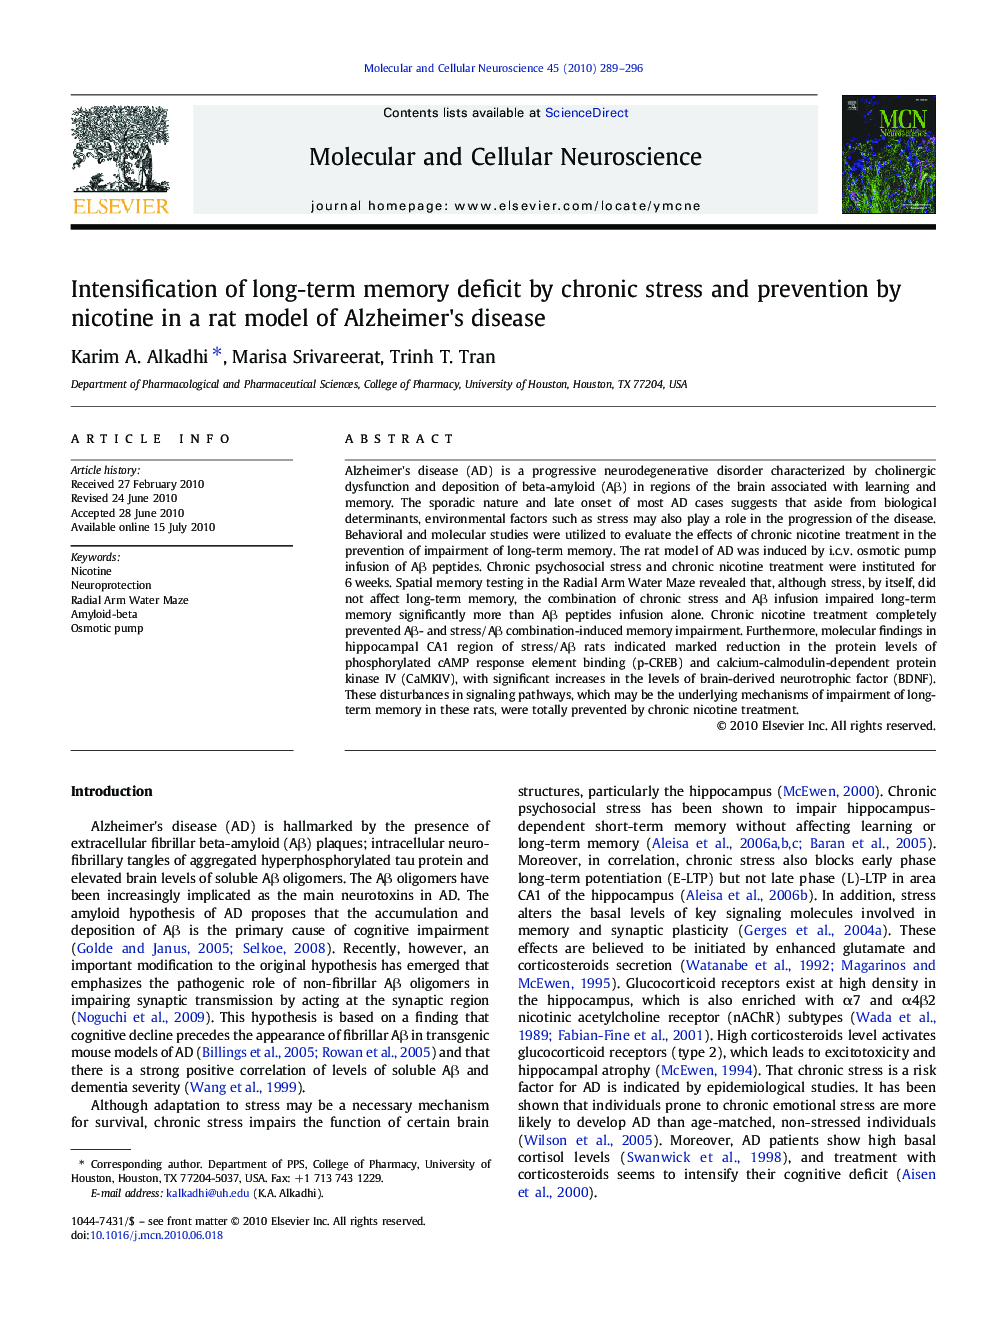 Intensification of long-term memory deficit by chronic stress and prevention by nicotine in a rat model of Alzheimer's disease